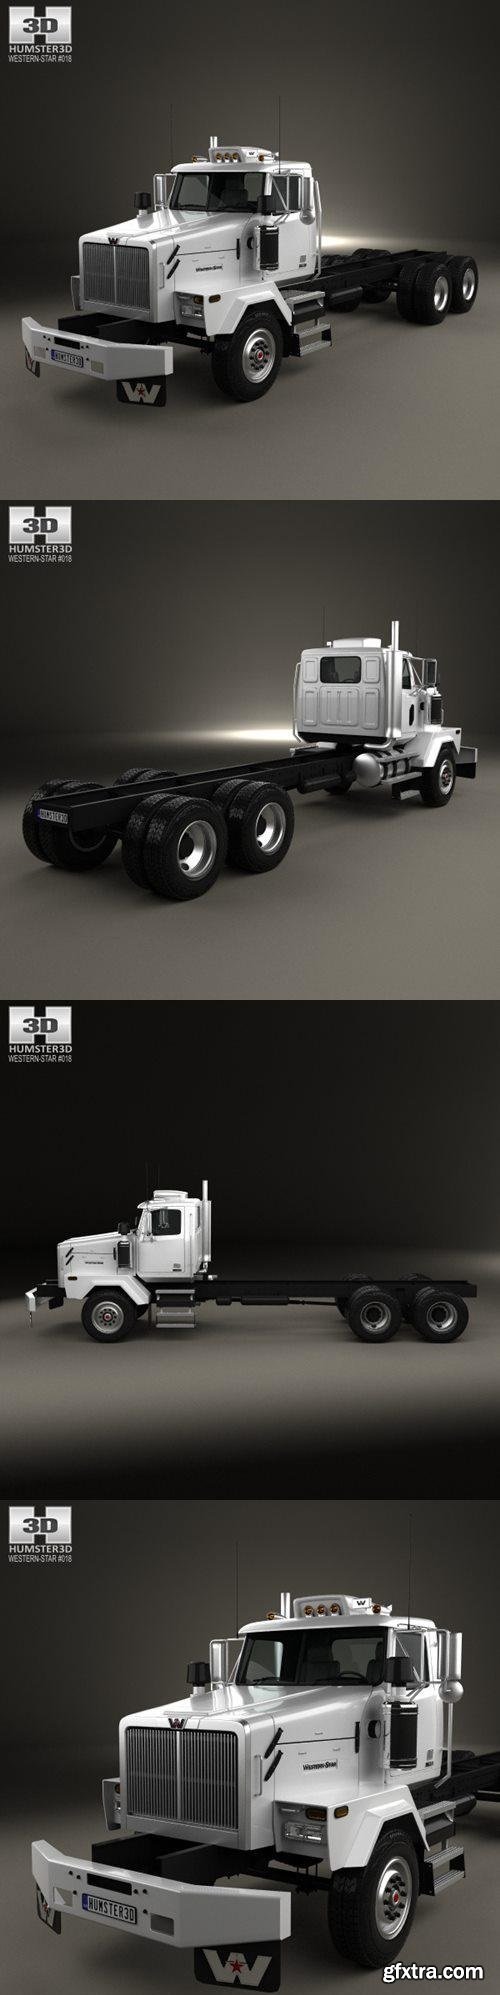 Western Star 4900 SB Day Cab Chassis Truck 2008 - 3D Model